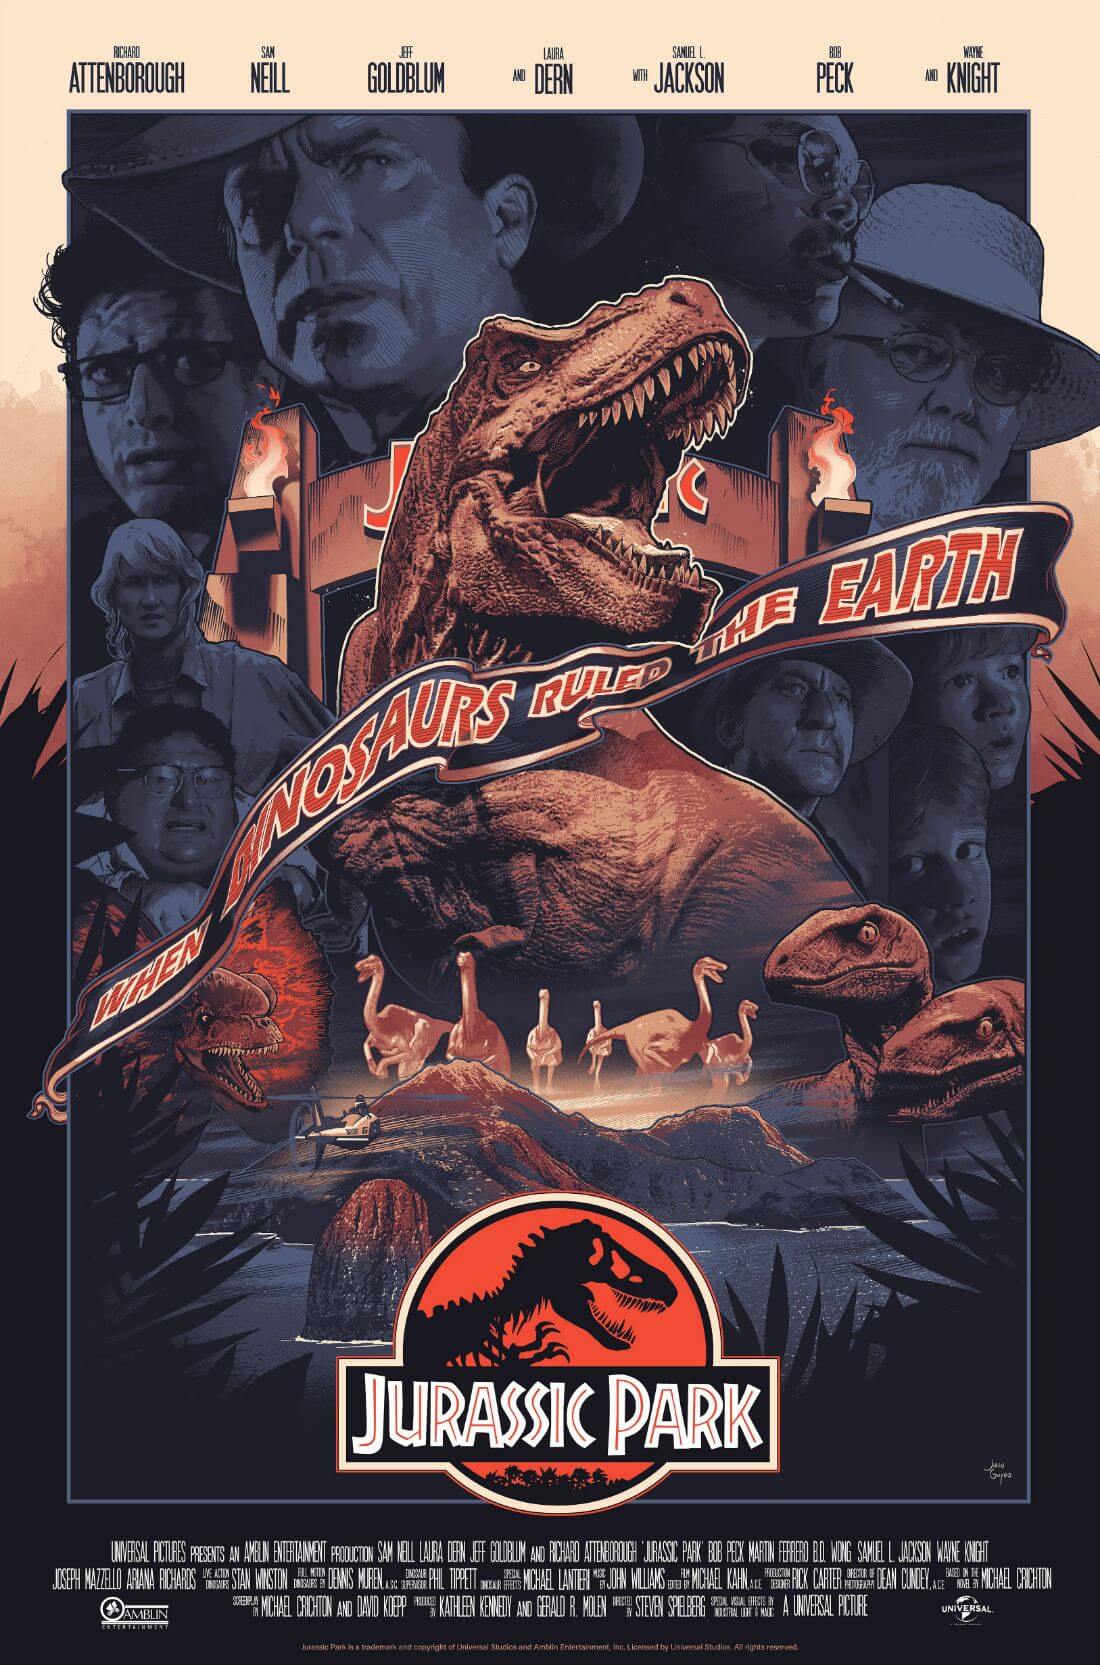 Jurassic Park - Hollywood Movie Art Poster - Art Prints by Movie Posters, Buy Posters, Frames, Canvas & Digital Art Prints